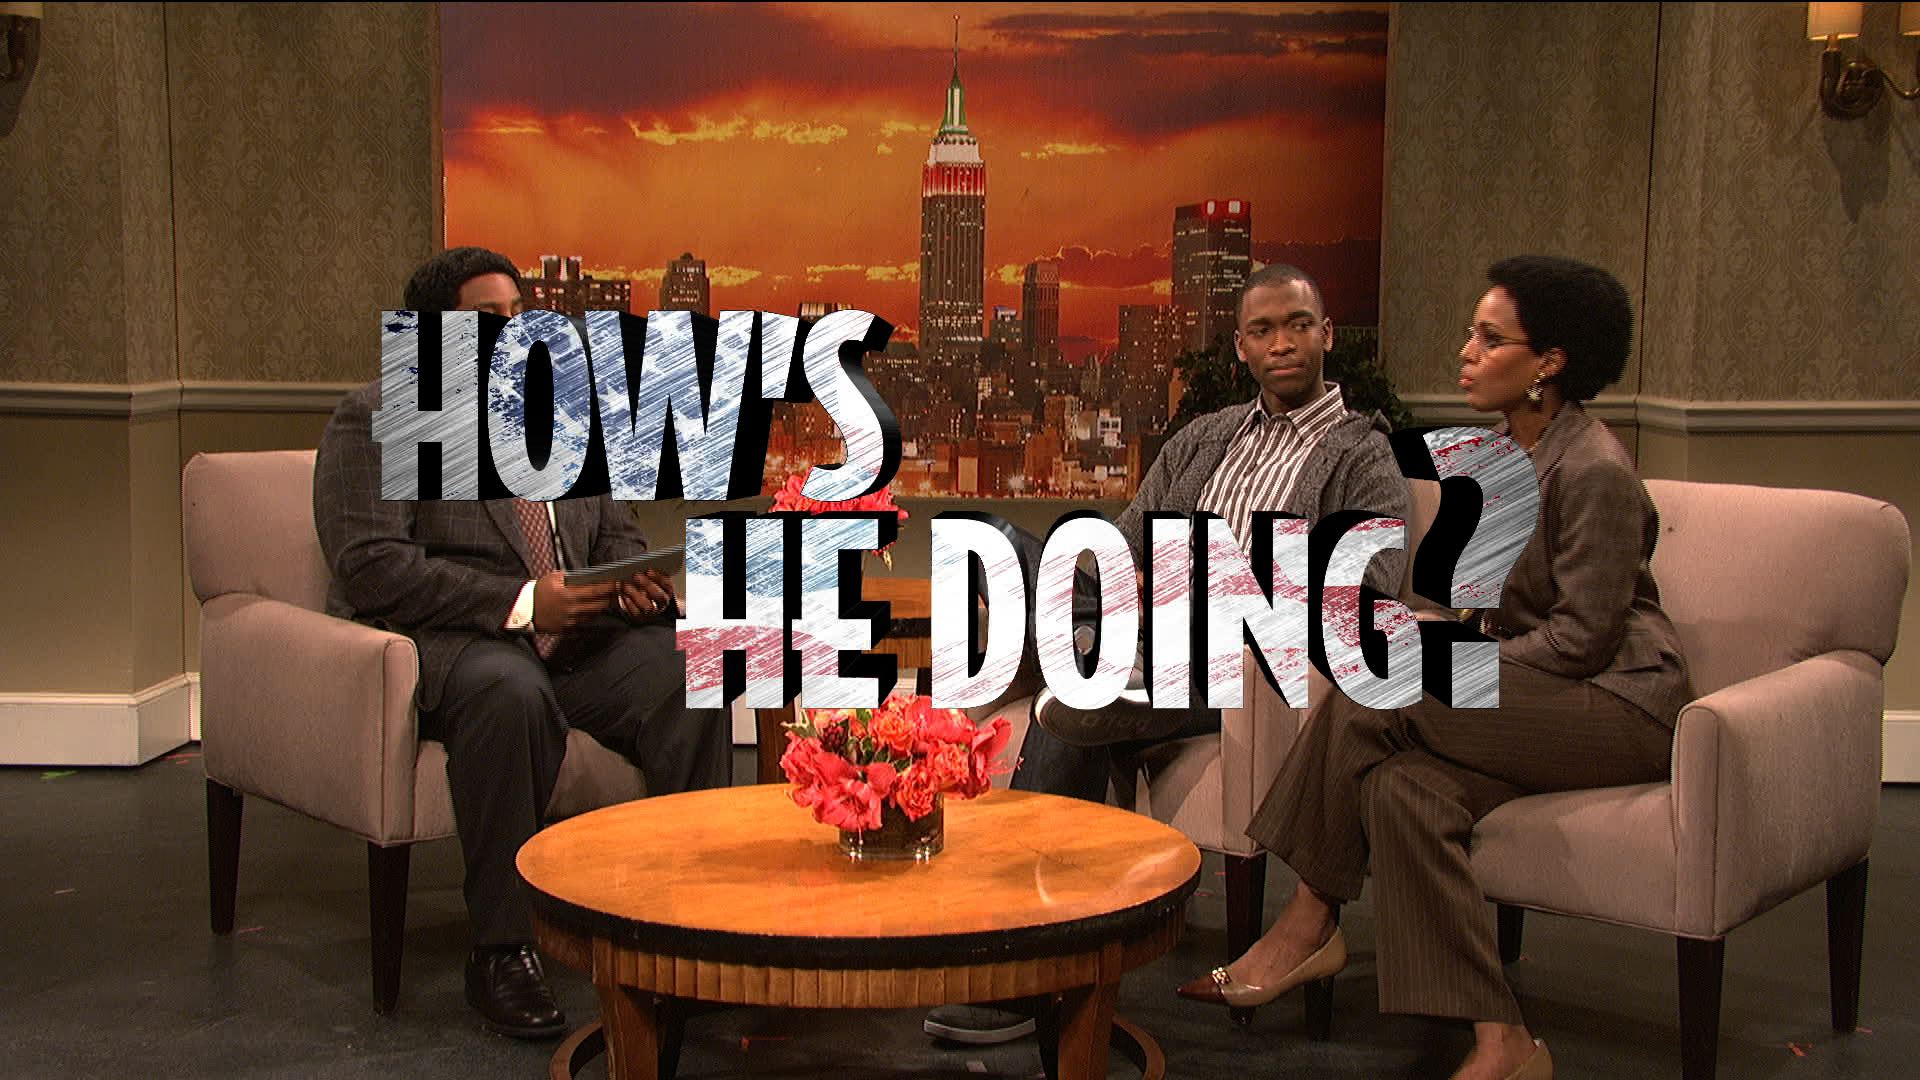 Kerry Washington on SNL: On African Americans’ unconditional high Obama approval rating